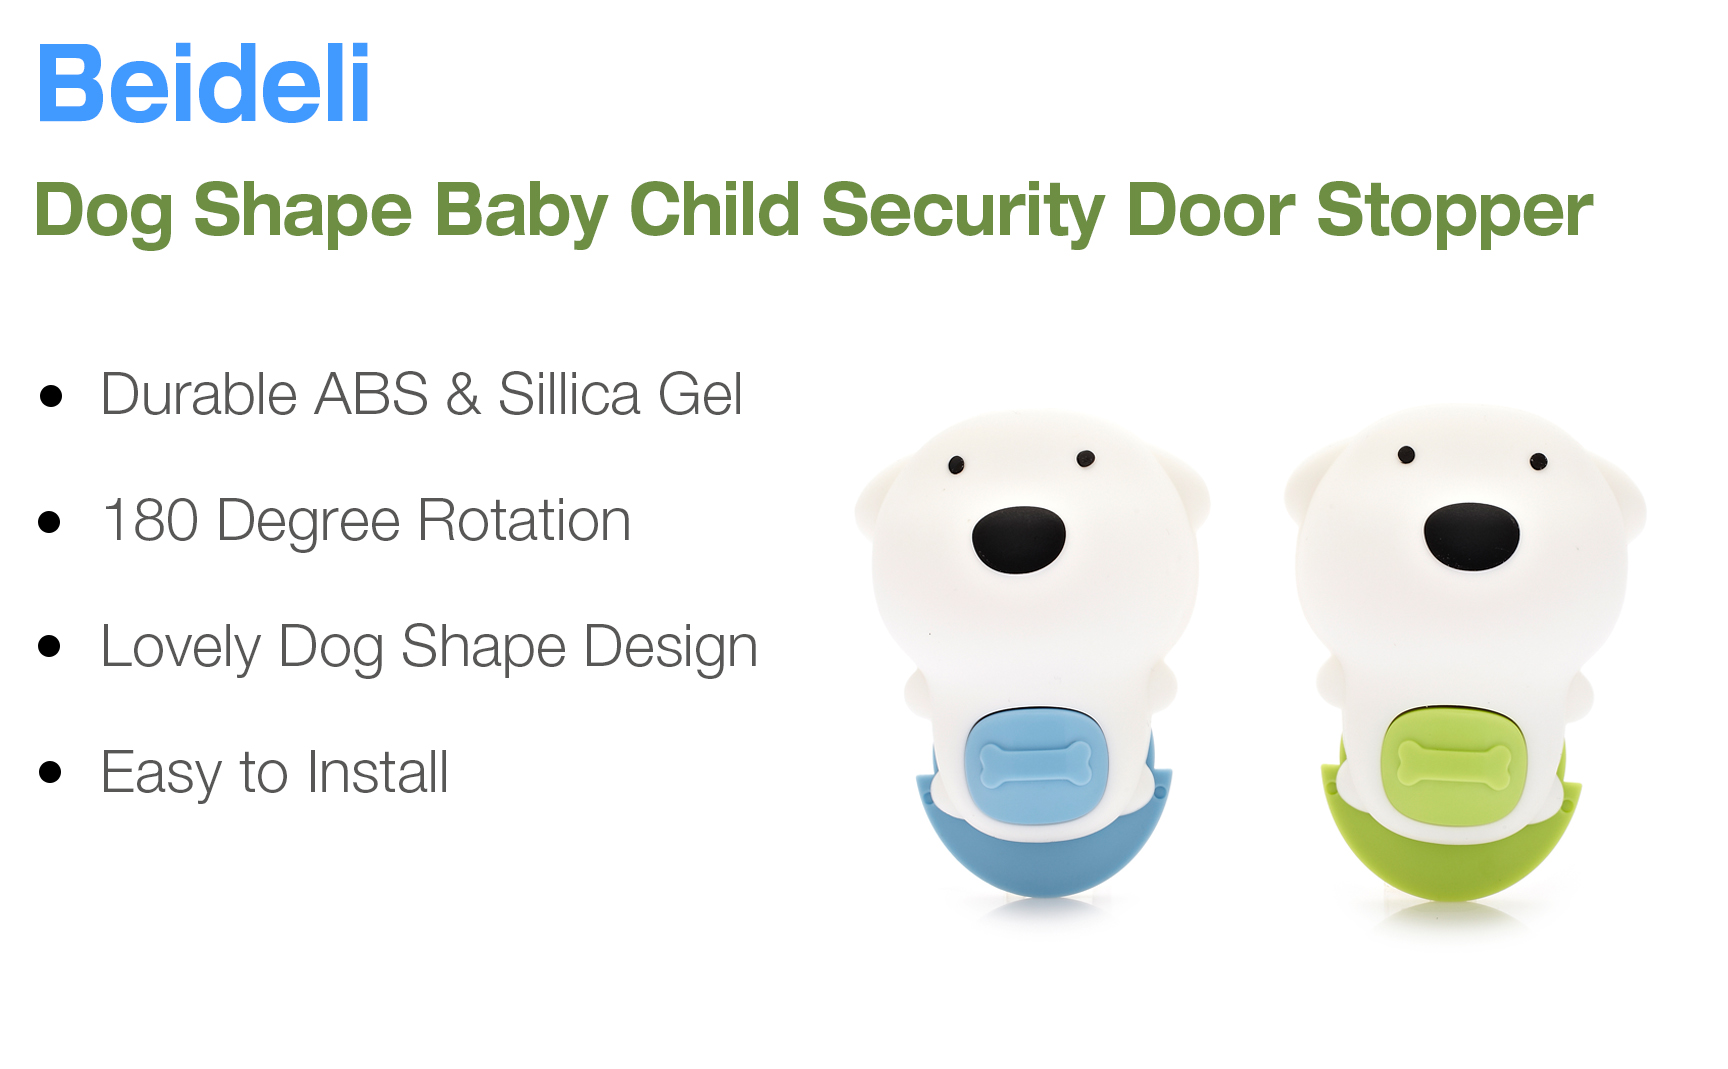 Beideli-Dog-Shape-180-Degree-Rotation-Baby-Child-Security-Pinch-Guard-Injury-Preventor-Door-Stopper-1260858